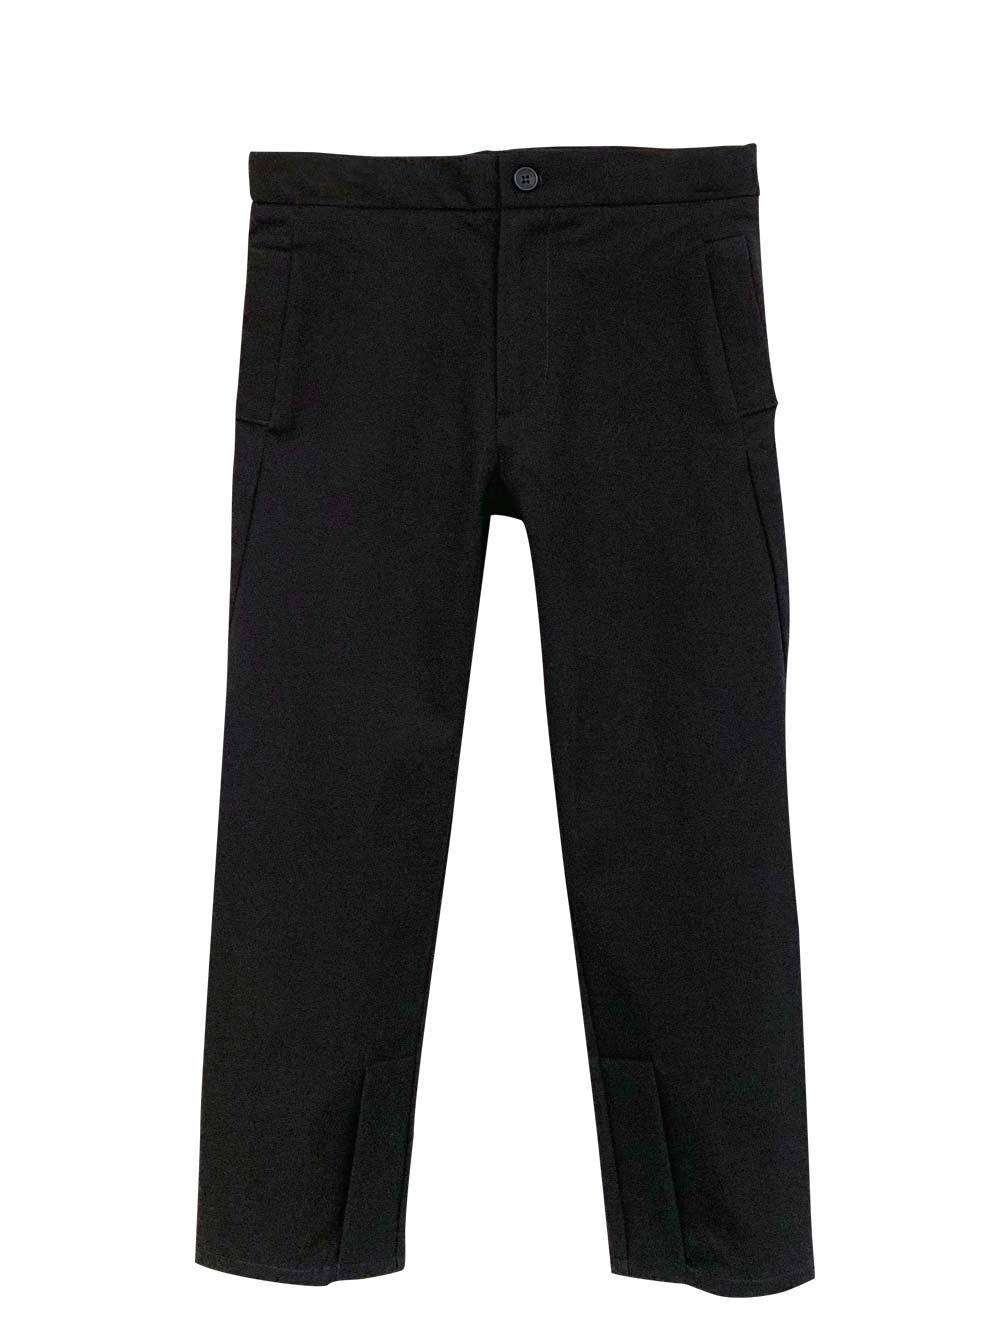 Polomi Fitted Trousers